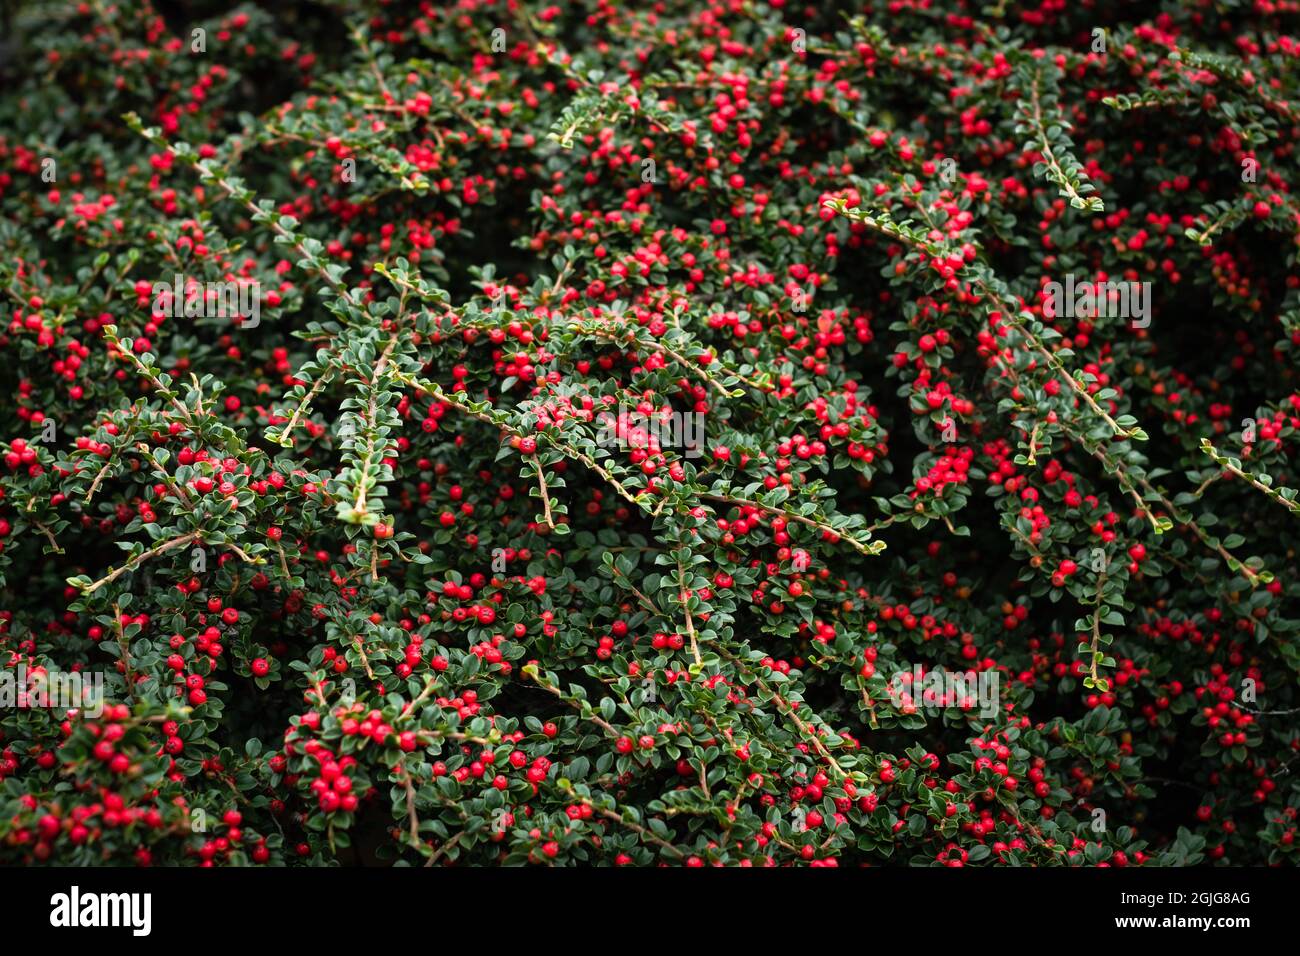 Cotoneaster bush with red berries and green leaves. Red and green texture background. Great for Christmas decorations Stock Photo